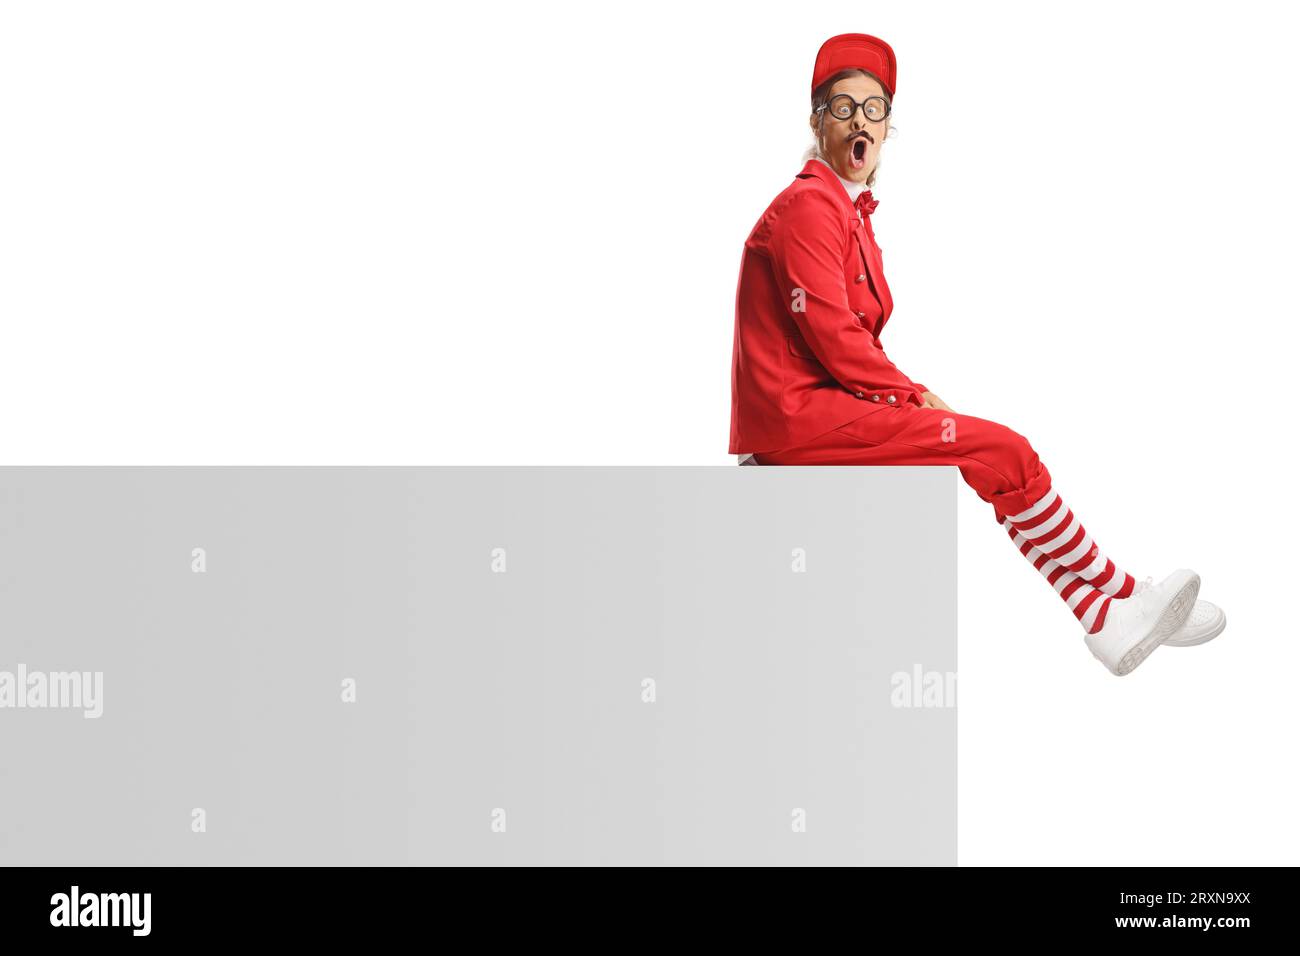 Funny entertainer in a red suit sitting on a wall isolated on white background Stock Photo